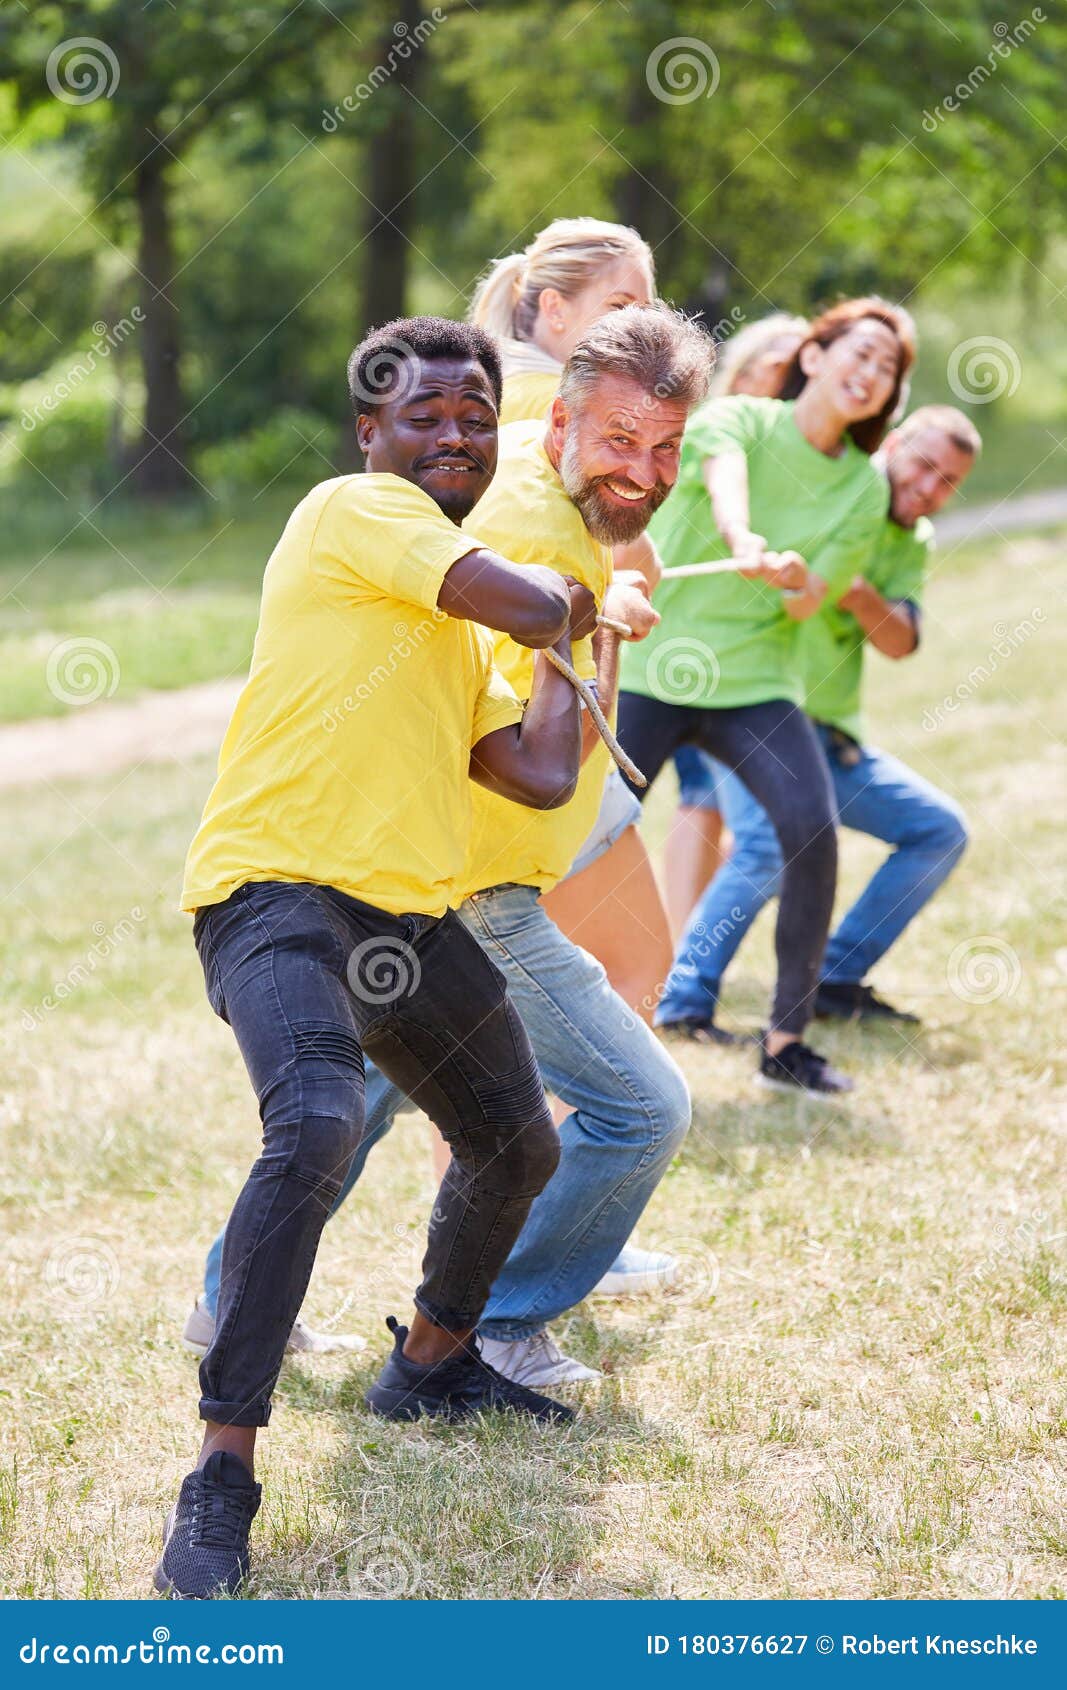 Two Happy Teams in Tug-of-war with Rope Stock Image - Image of ...